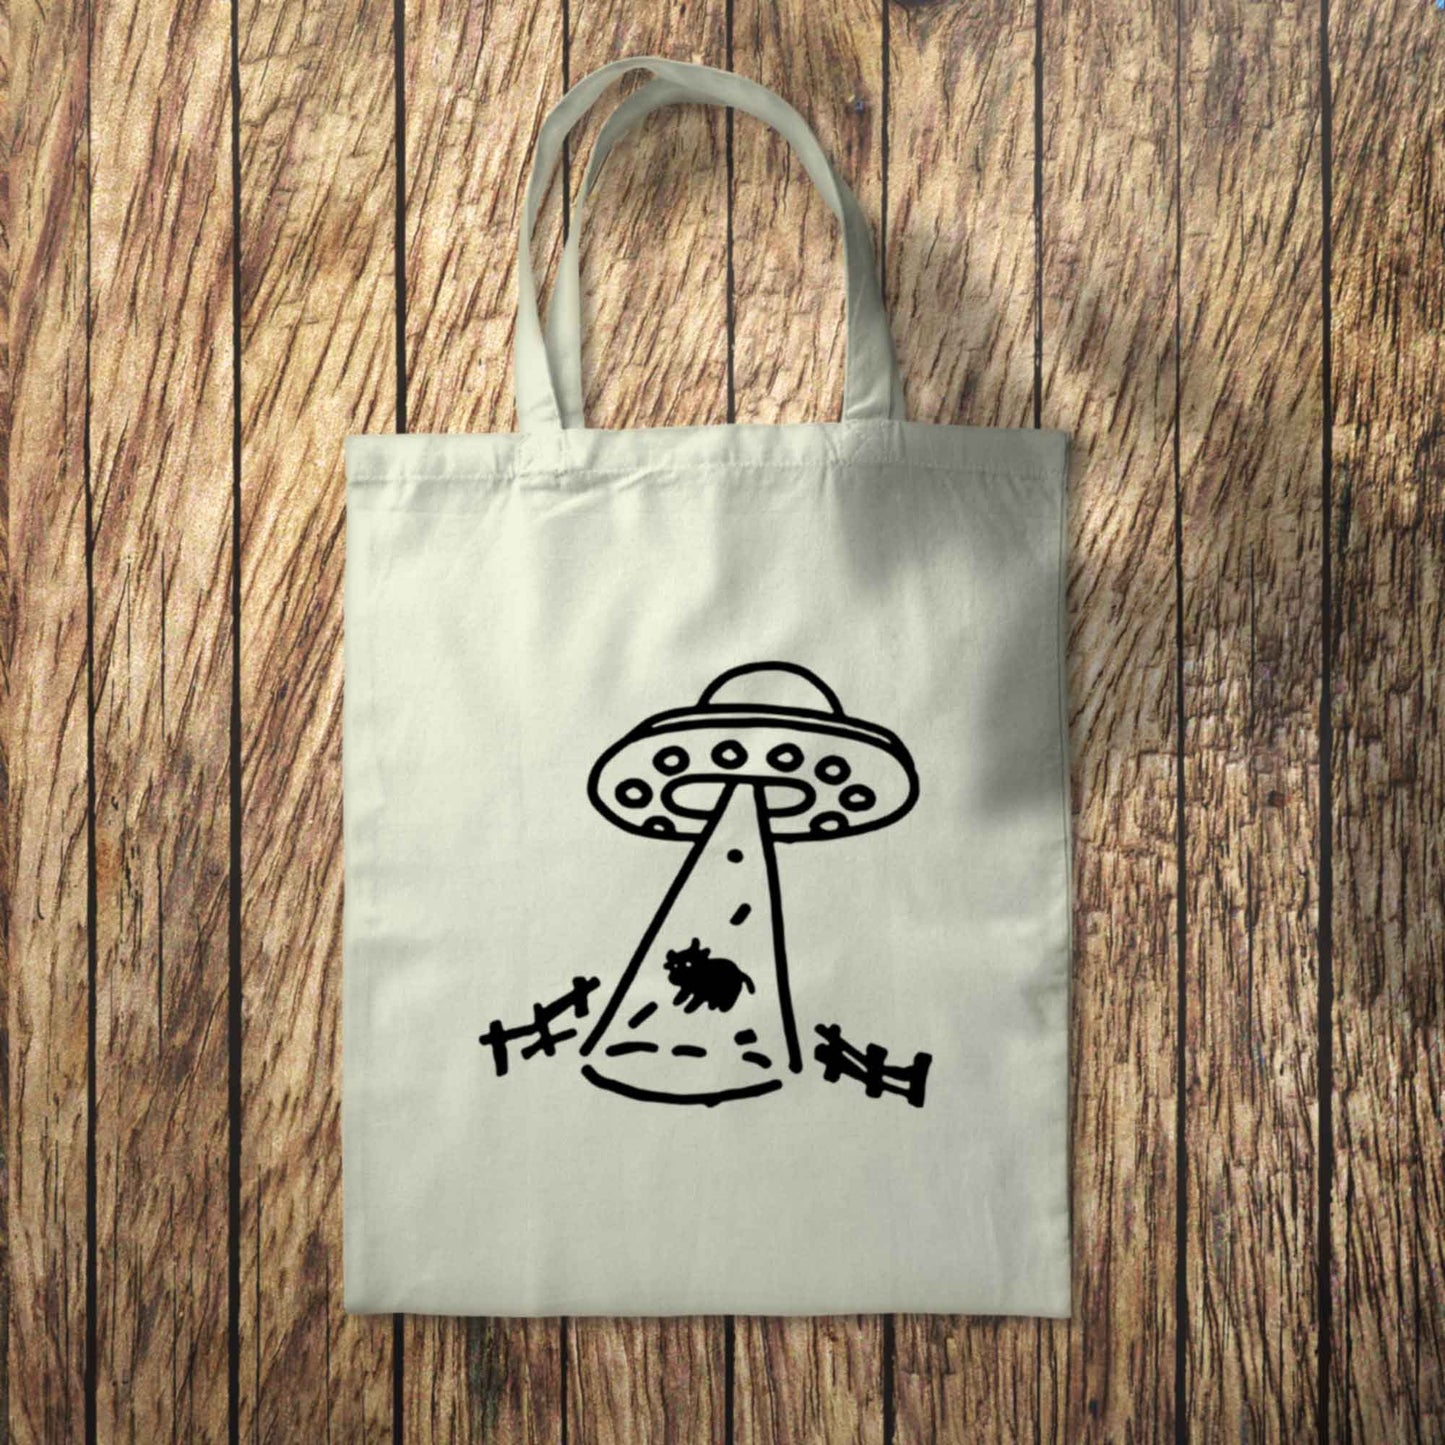 Abduction Cow Tote 10L Halloween Bag